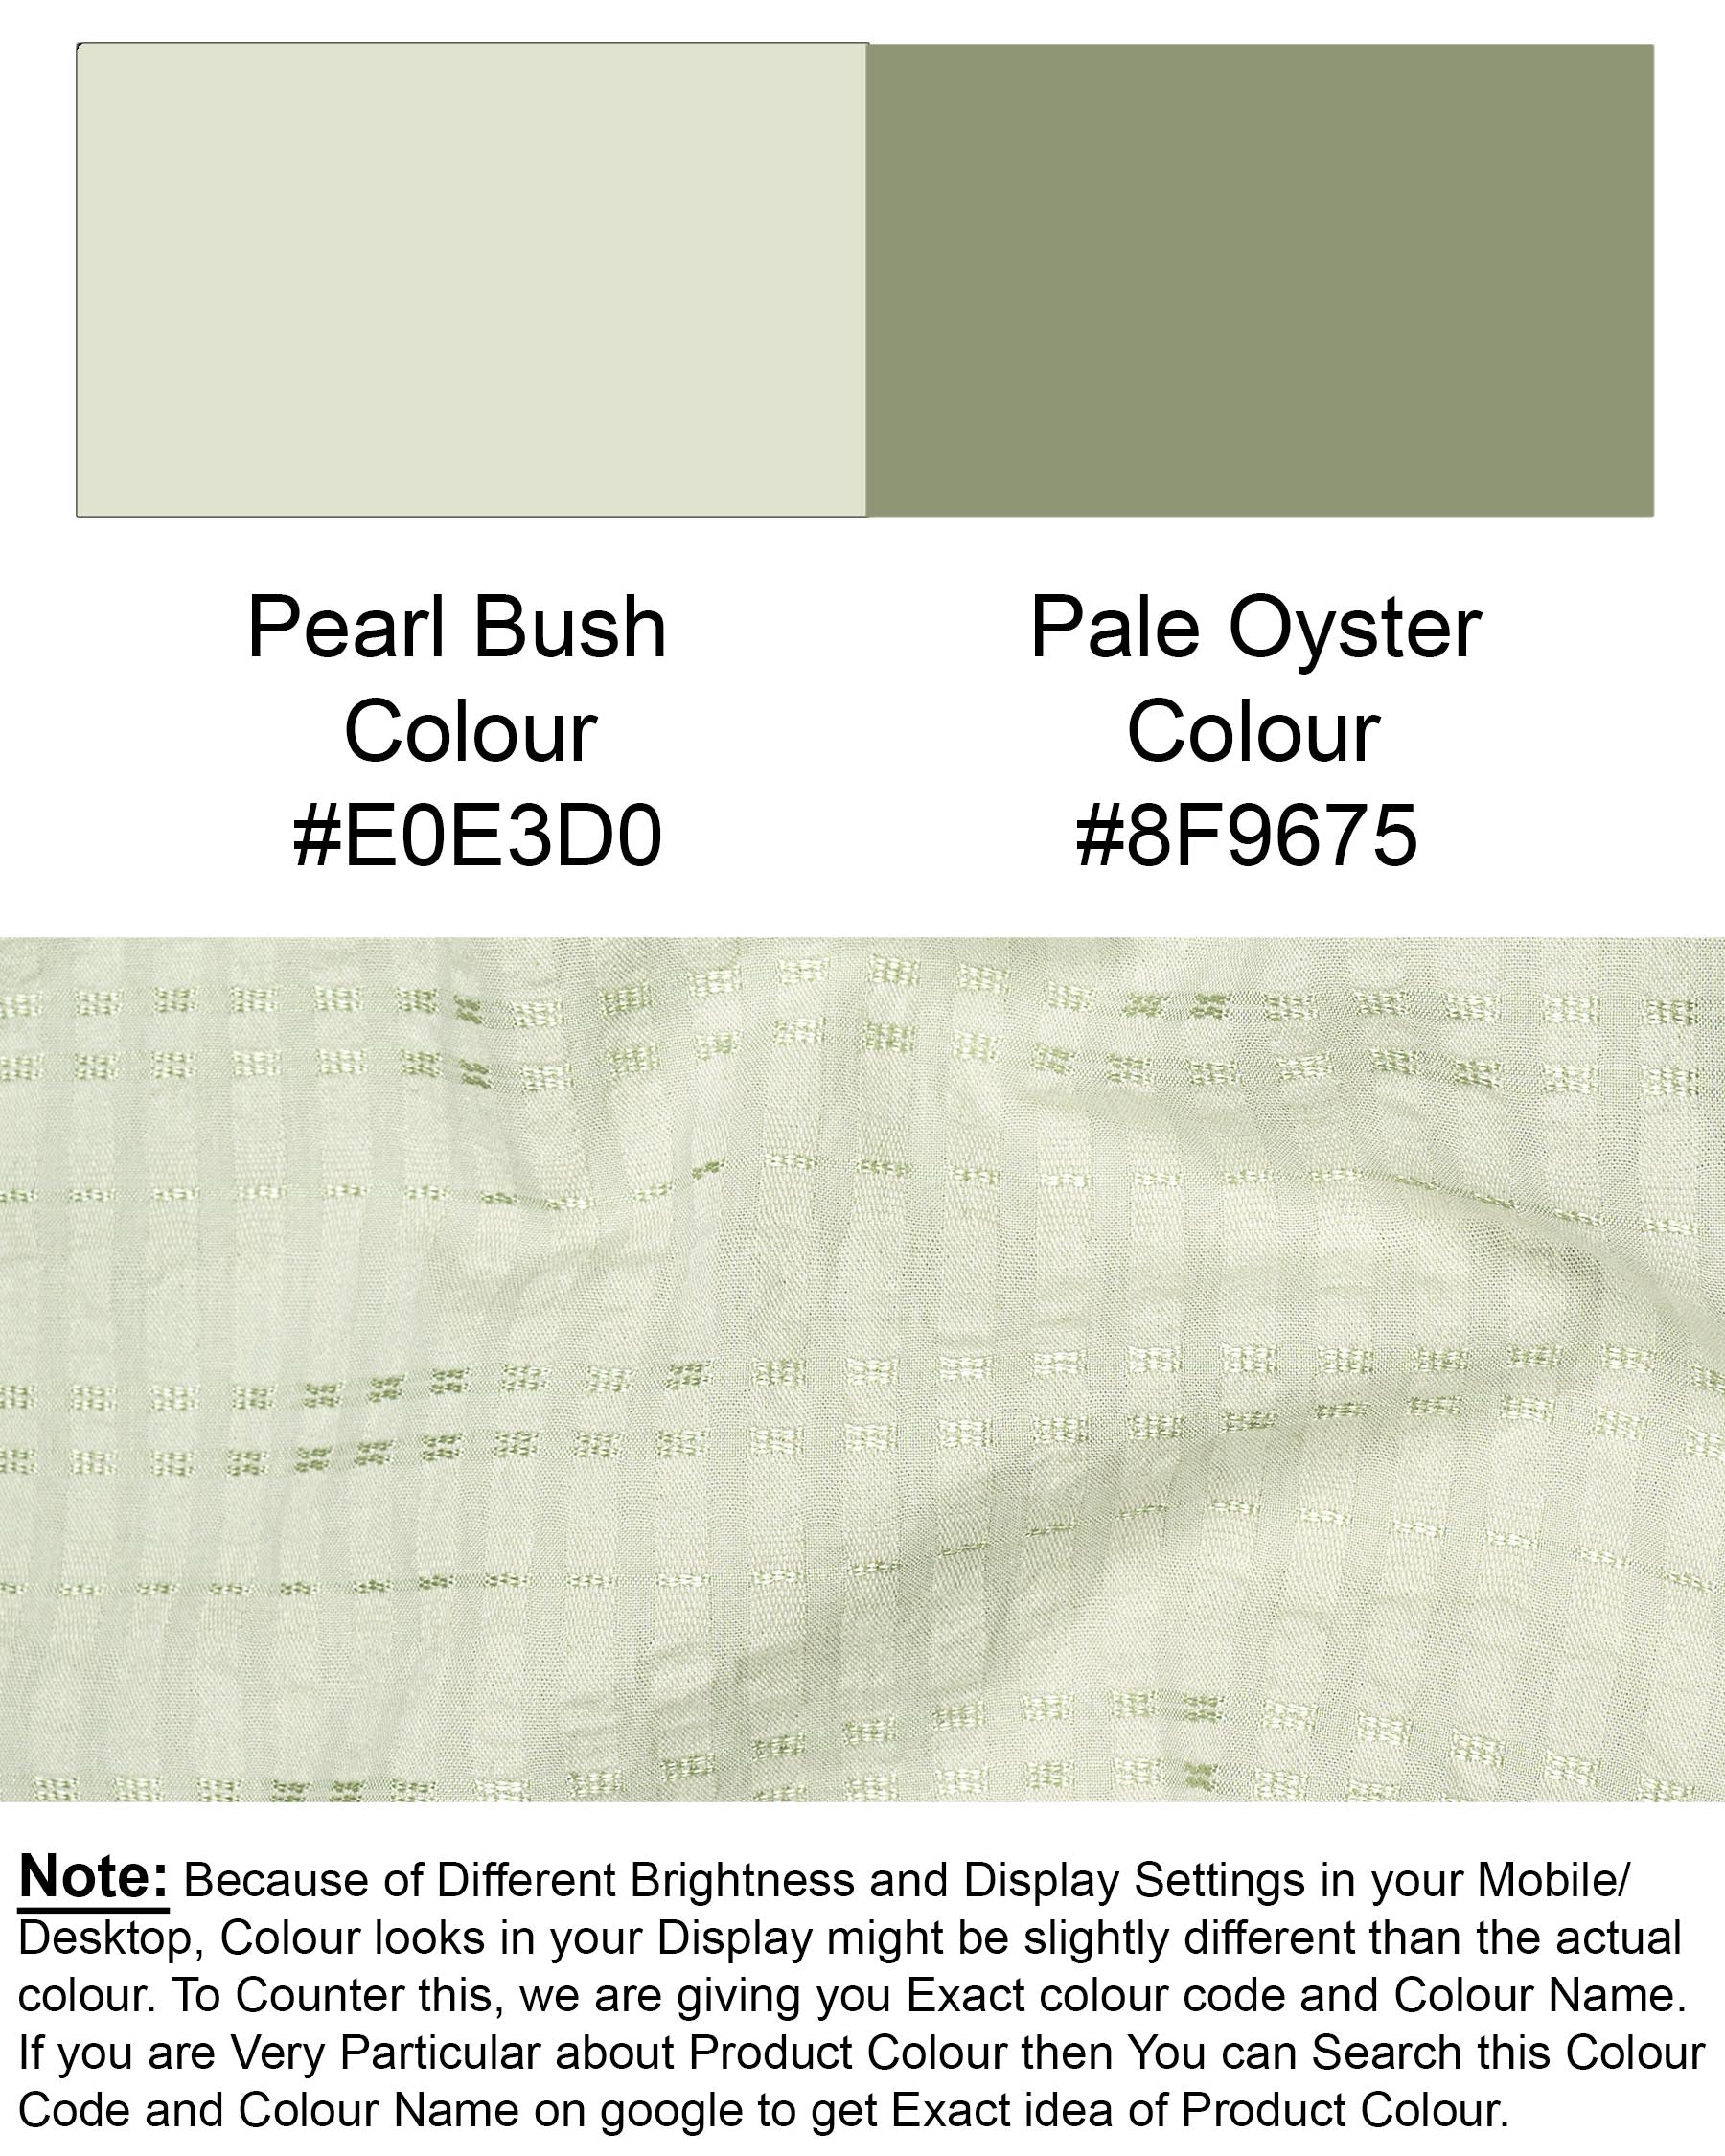 Pearl Bush with Pale Oyster Striped Seersucker Giza Cotton Shirt 7013-BD-38,7013-BD-38,7013-BD-39,7013-BD-39,7013-BD-40,7013-BD-40,7013-BD-42,7013-BD-42,7013-BD-44,7013-BD-44,7013-BD-46,7013-BD-46,7013-BD-48,7013-BD-48,7013-BD-50,7013-BD-50,7013-BD-52,7013-BD-52